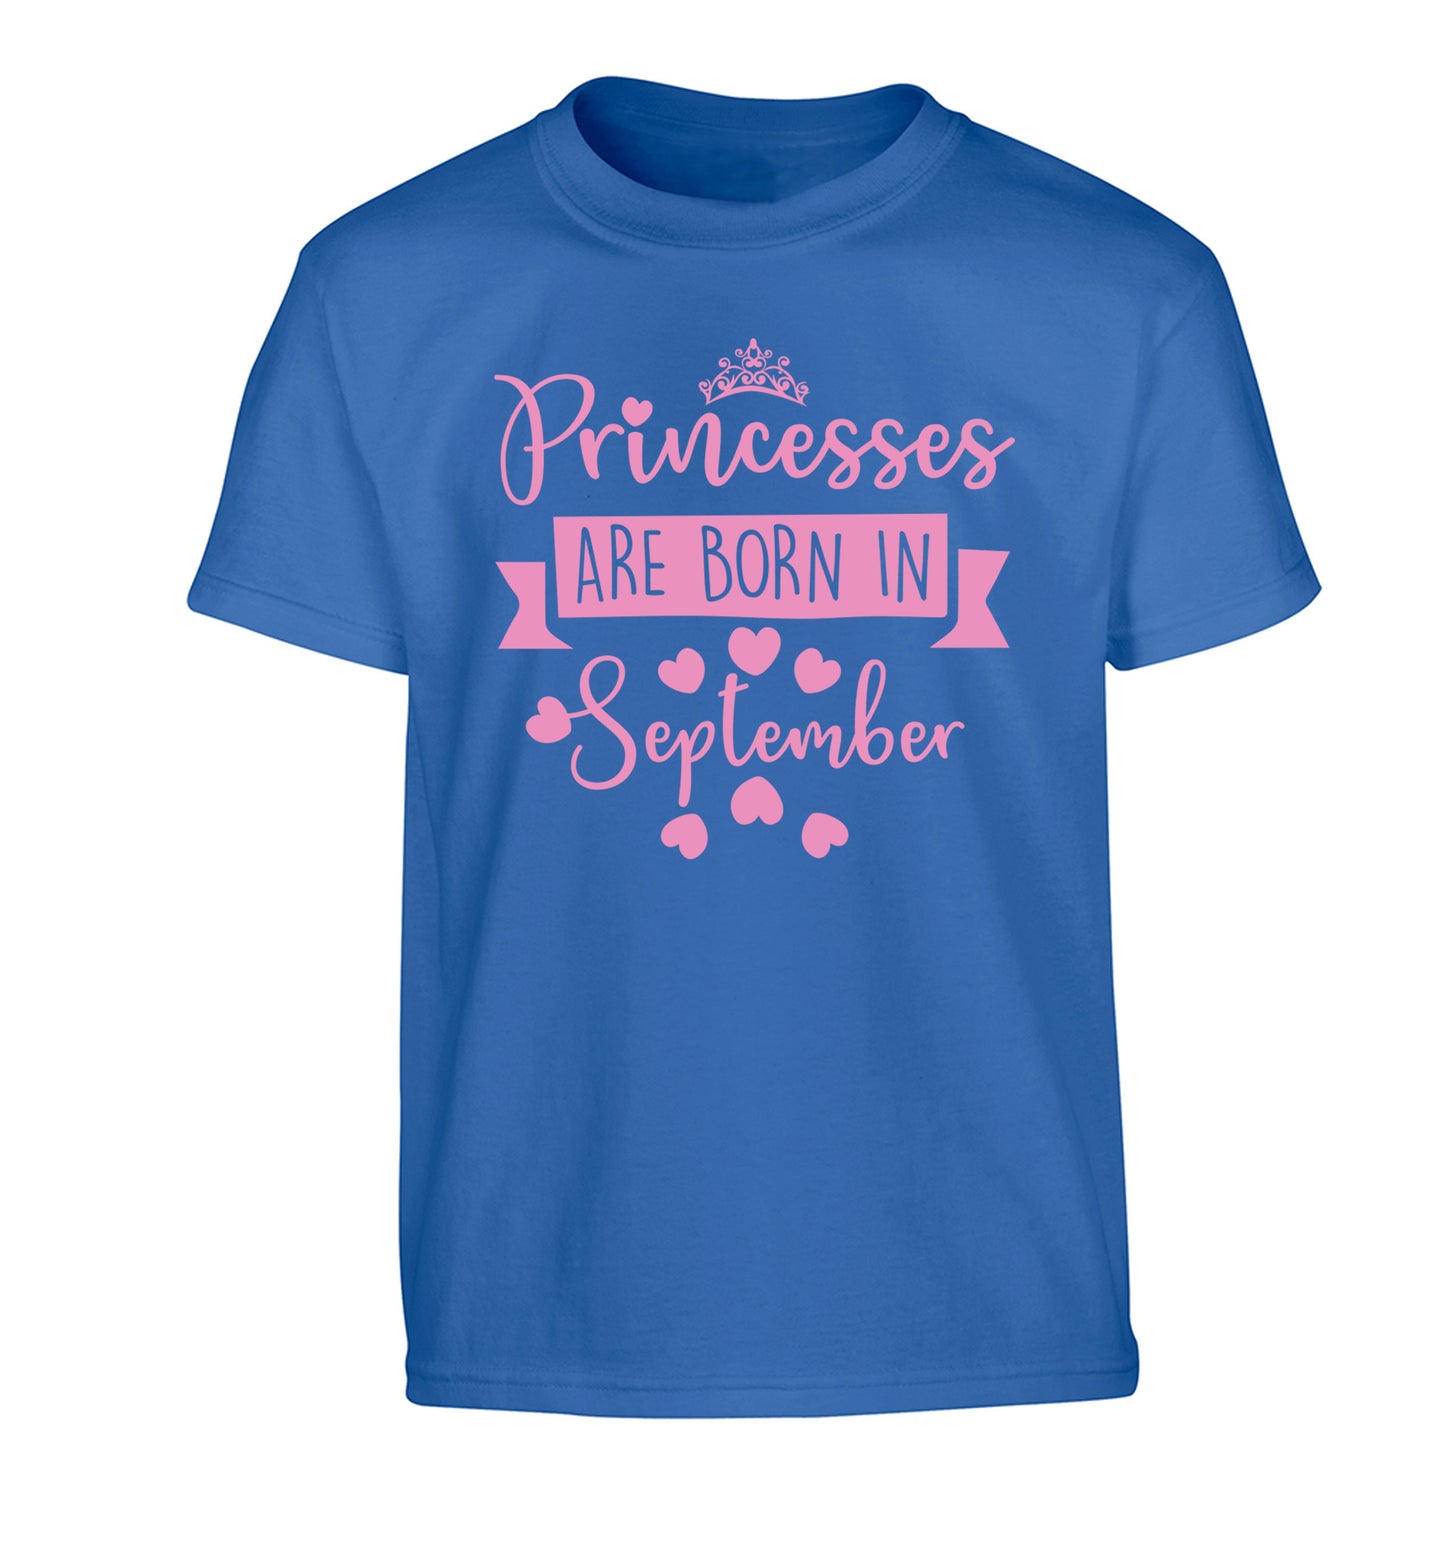 Princesses are born in September Children's blue Tshirt 12-13 Years